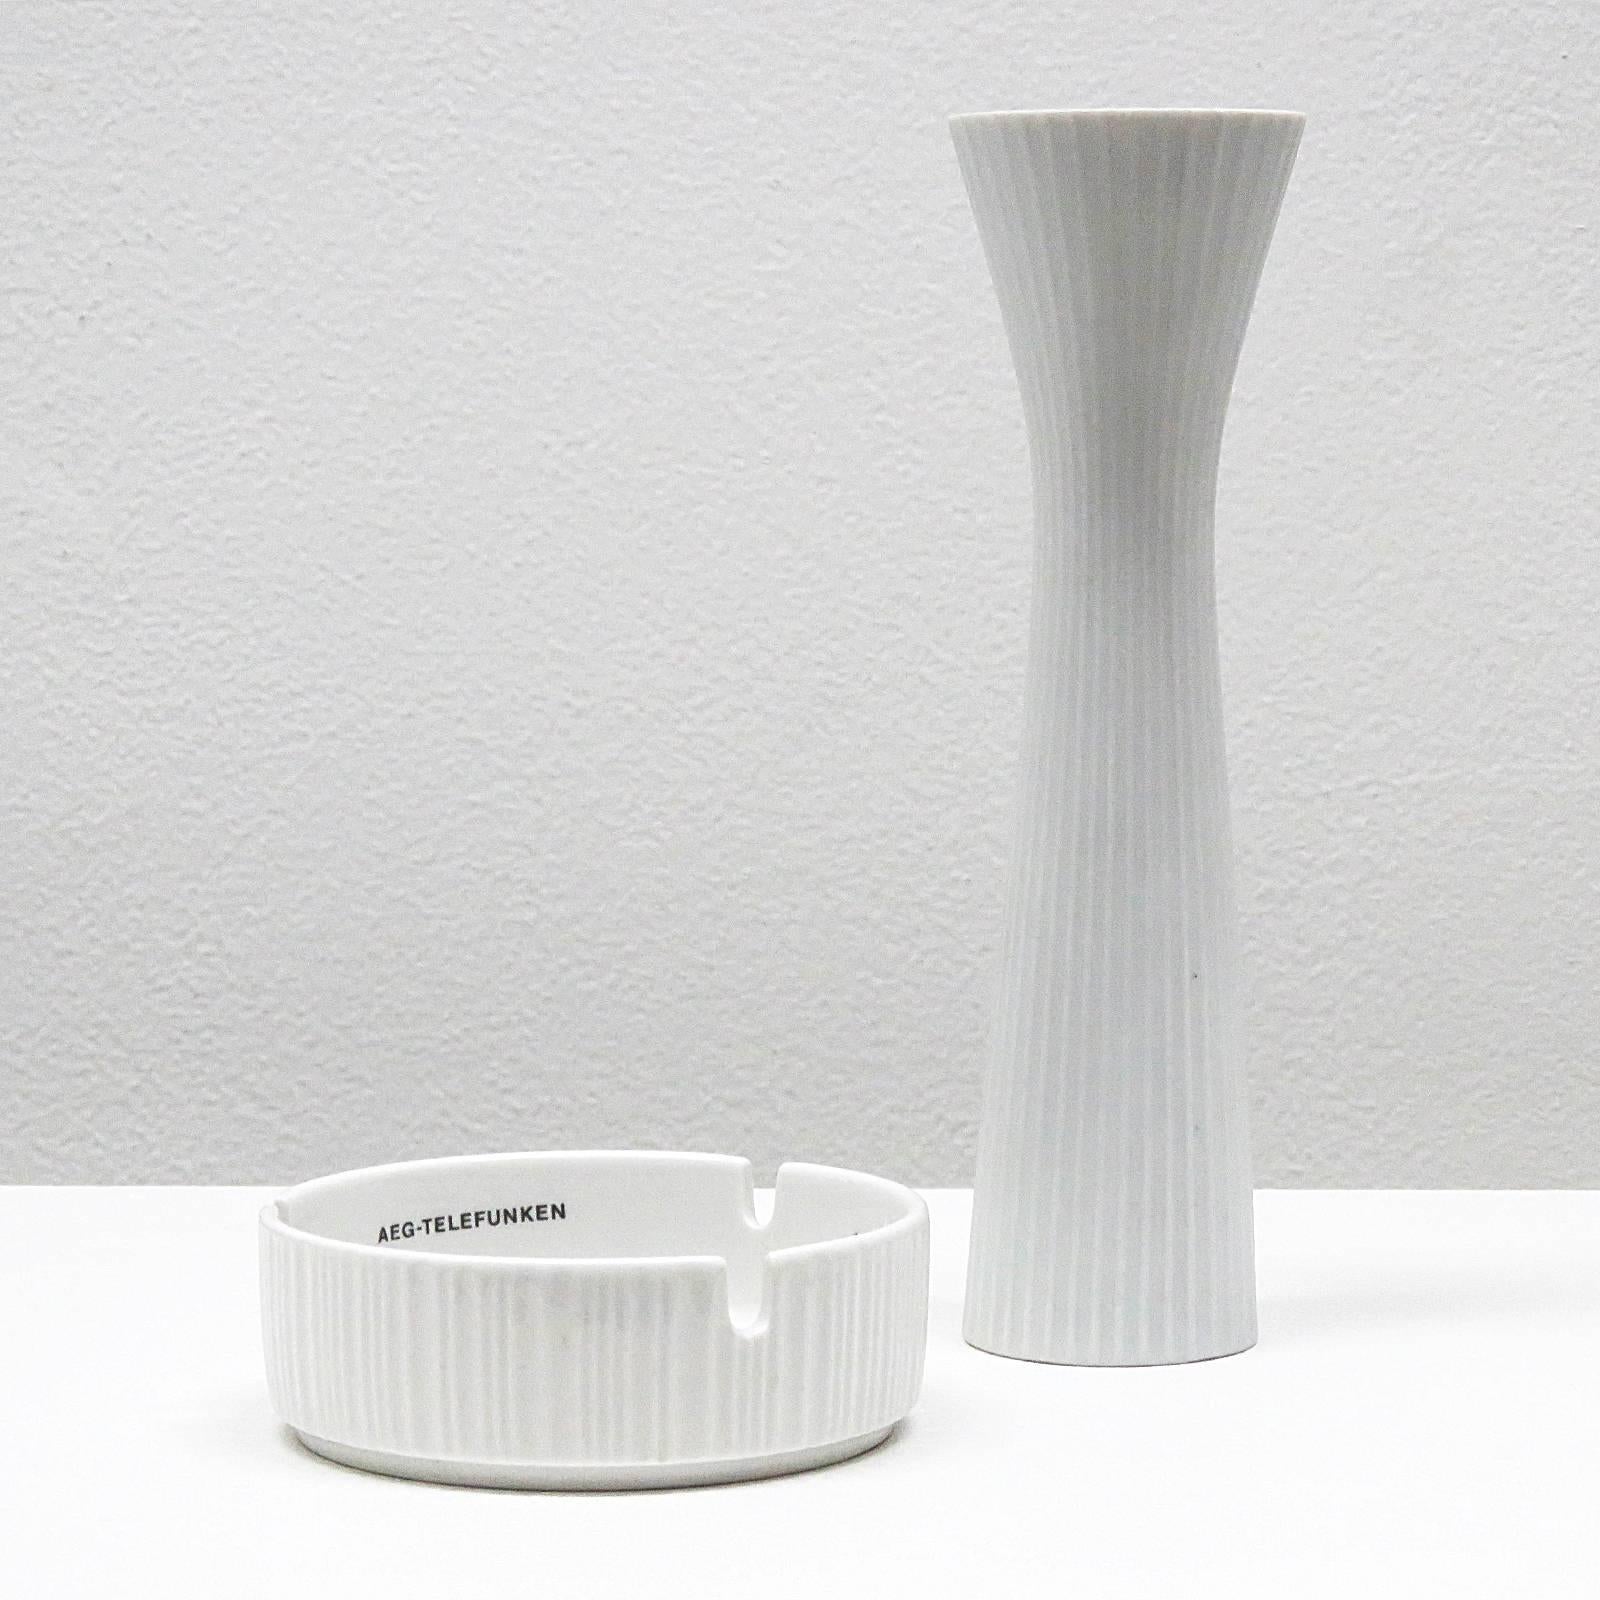 Wonderfully tailored and textured porcelain vase by Rosenthal Studio Line with matching ashtray for AEG-Telefunken.